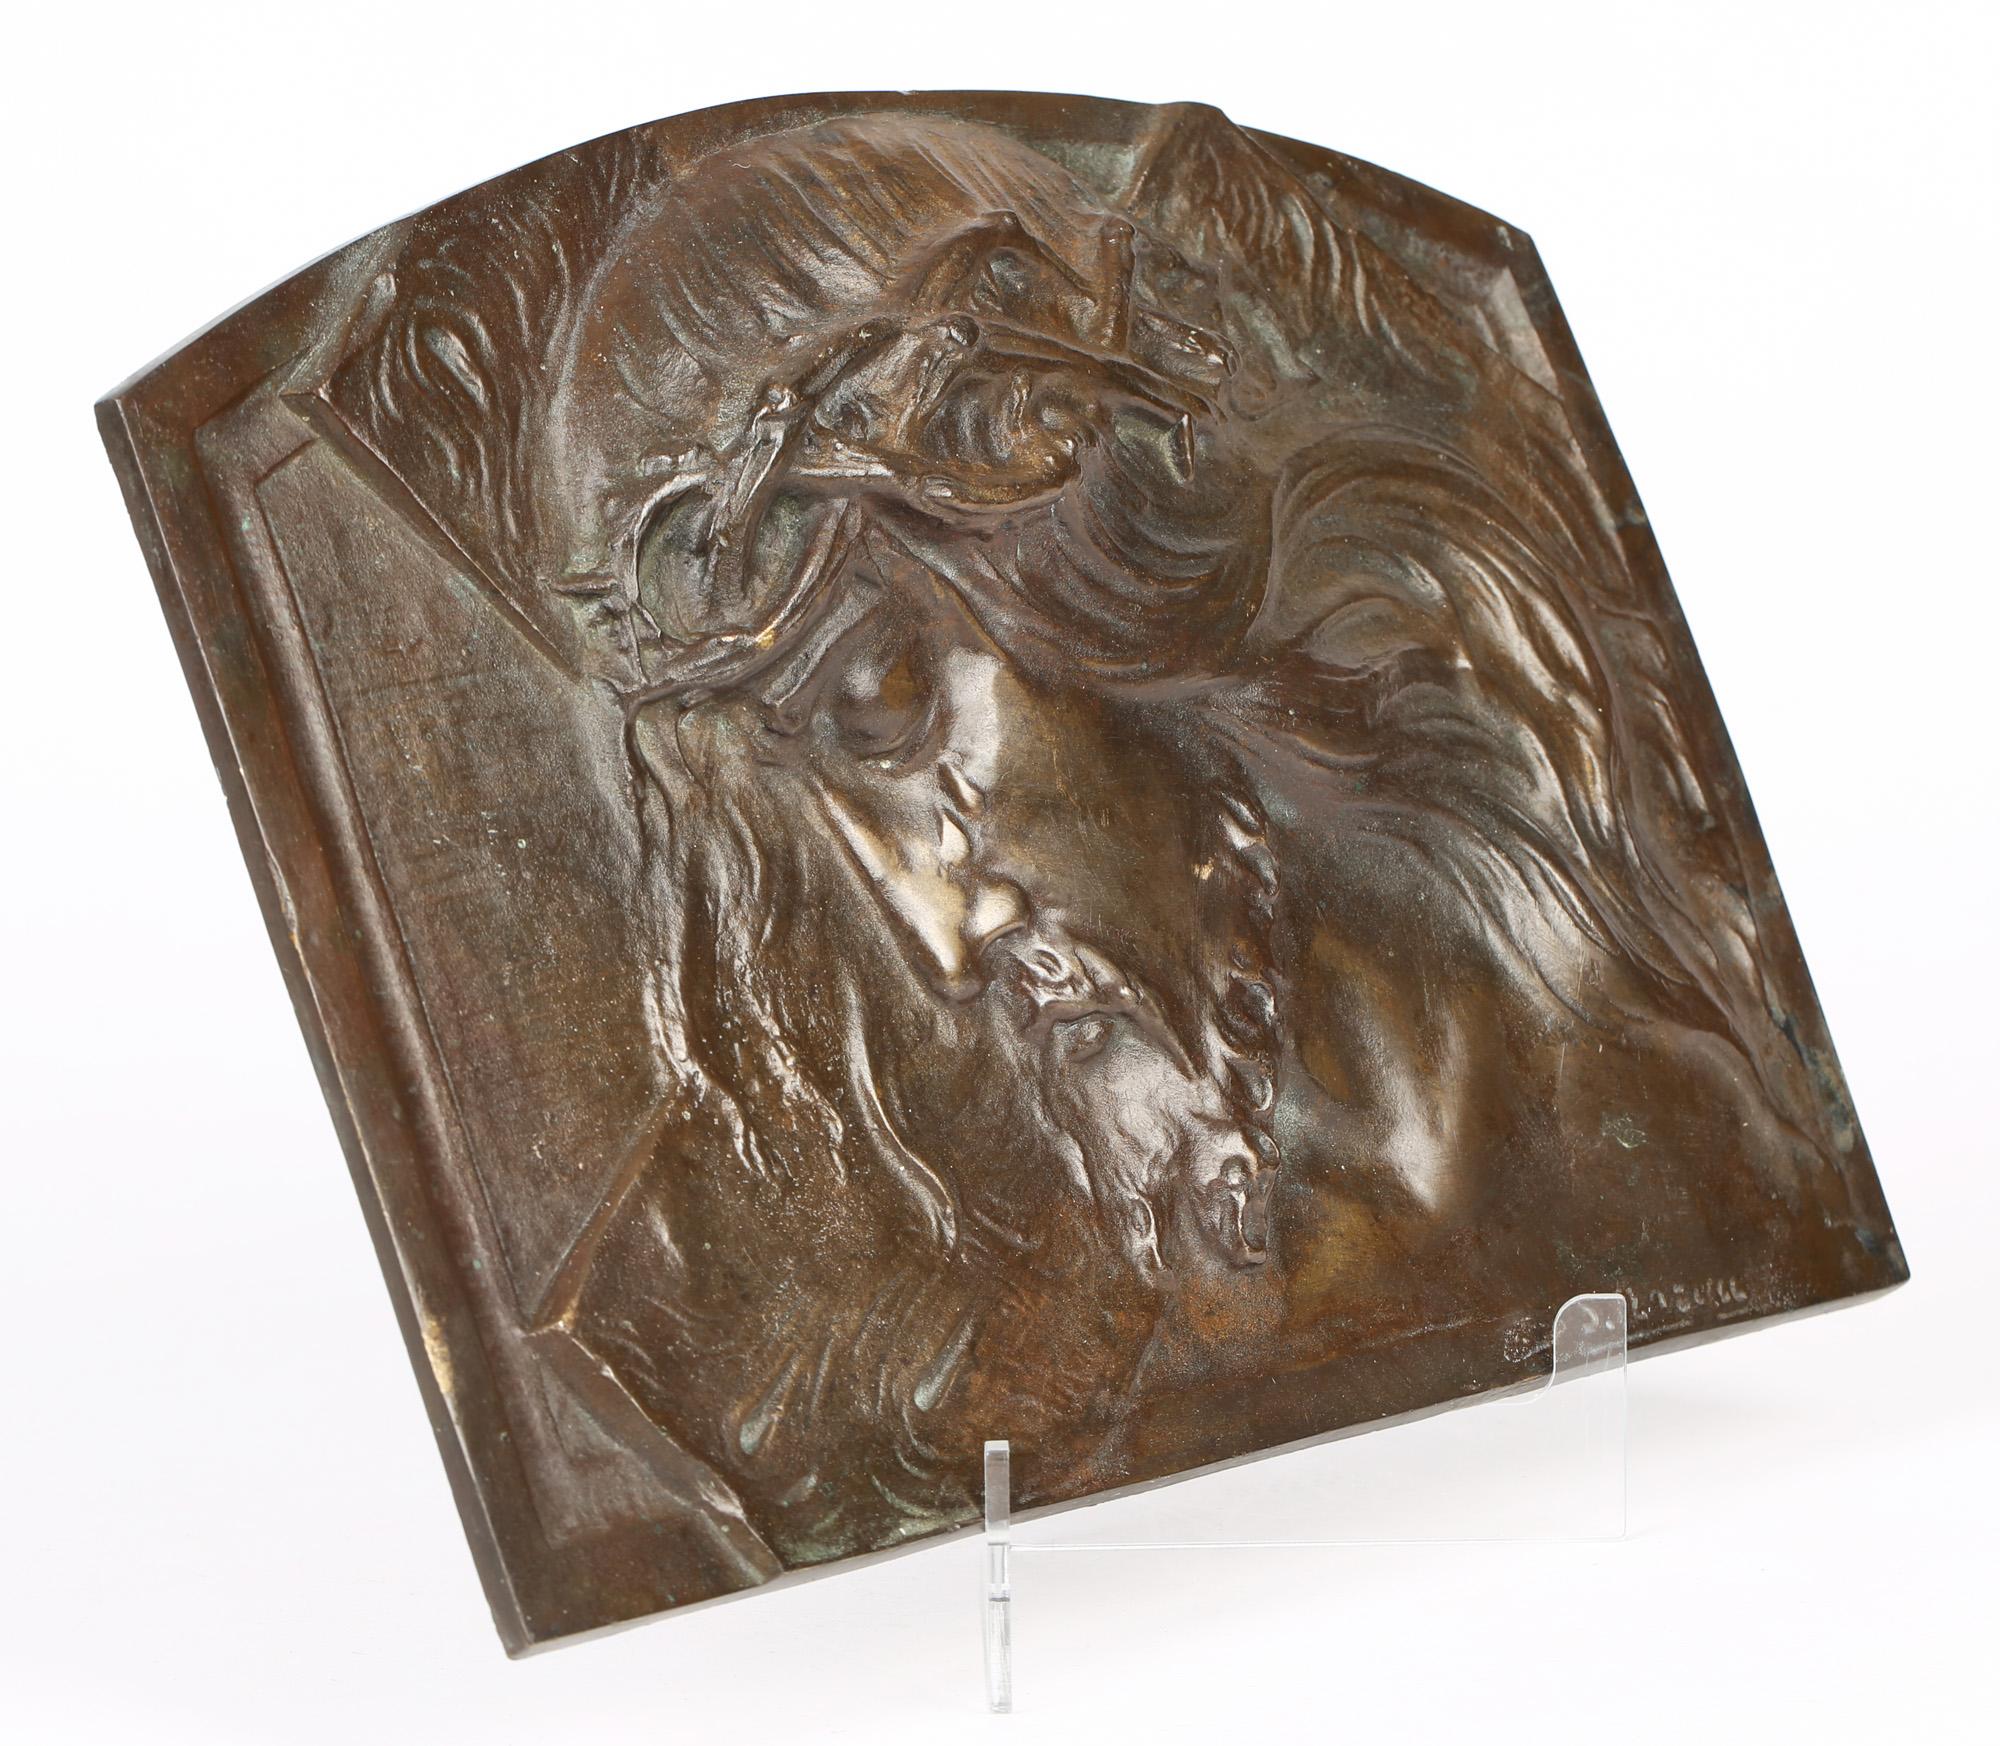 A stunning 'Art Deco' bronze plaque depicting Christ wearing the crown of thorns by renowned Belgian artist and sculptor Sylvain Norga (1892-1968) and dating from around 1920-30. The relief deep molded plaque is of rectangular shape with a slightly